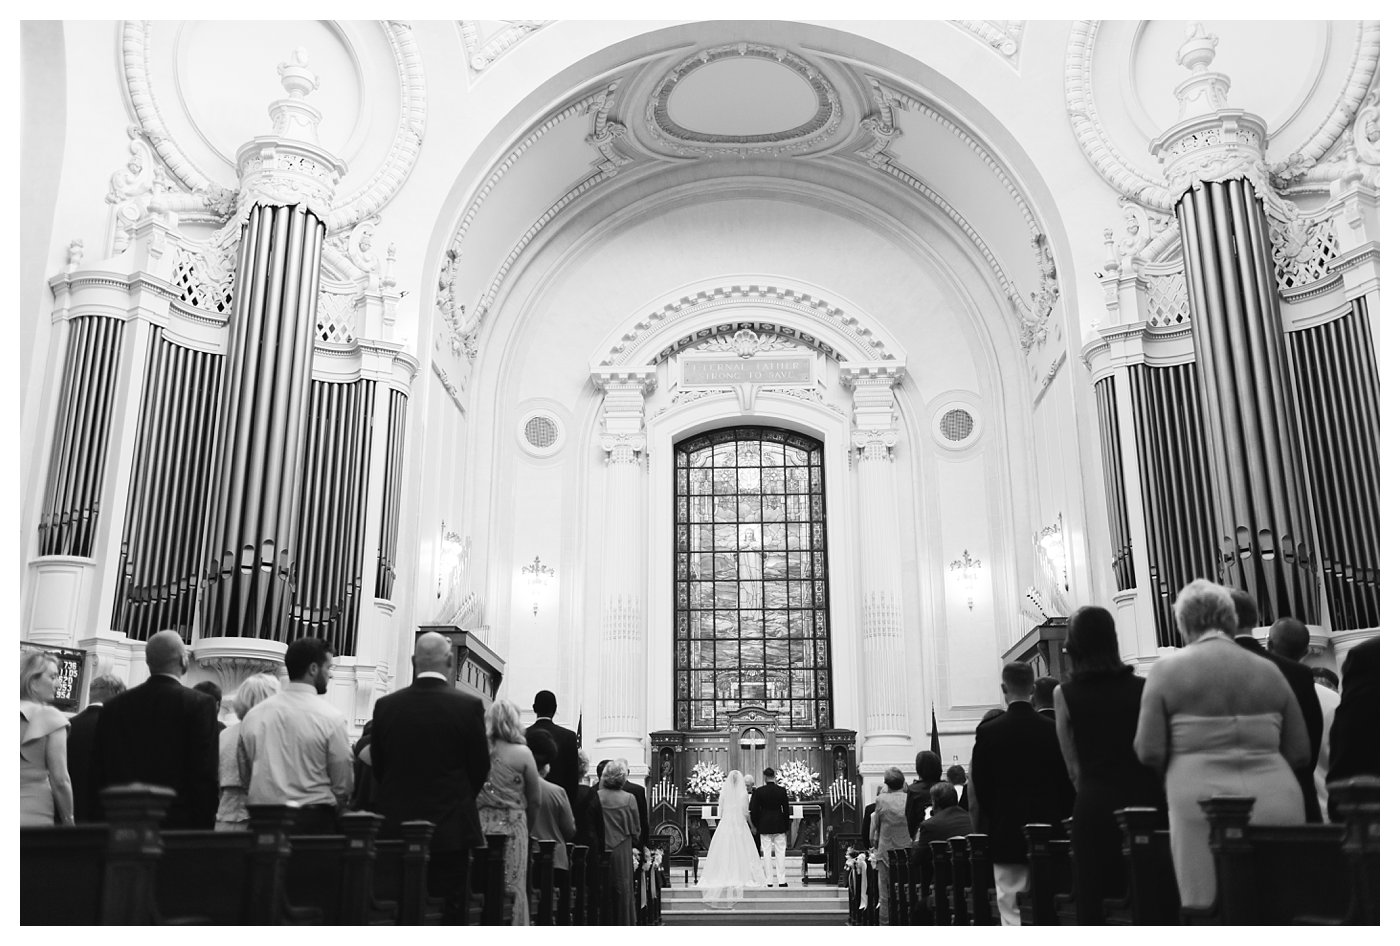 Wedding ceremony at the United States Naval Academy by Amanda and Grady Photography